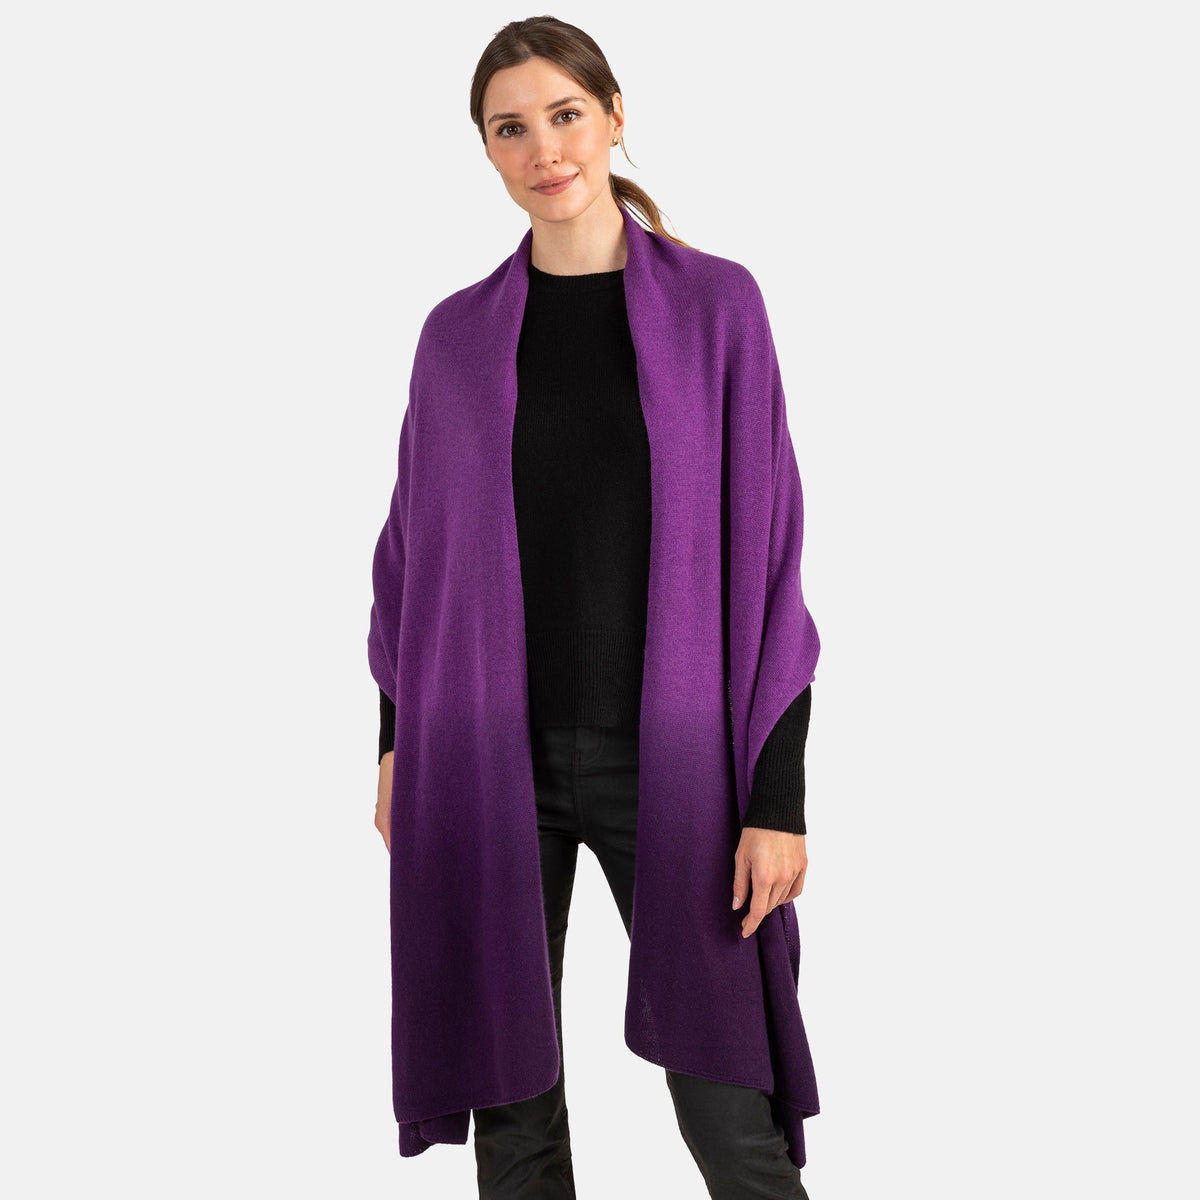 Picture of a woman wearing an oversized knitted cashmere travel wrap or scarf with an ombre pattern in grey and navy.  [Purple/Dark Purple]